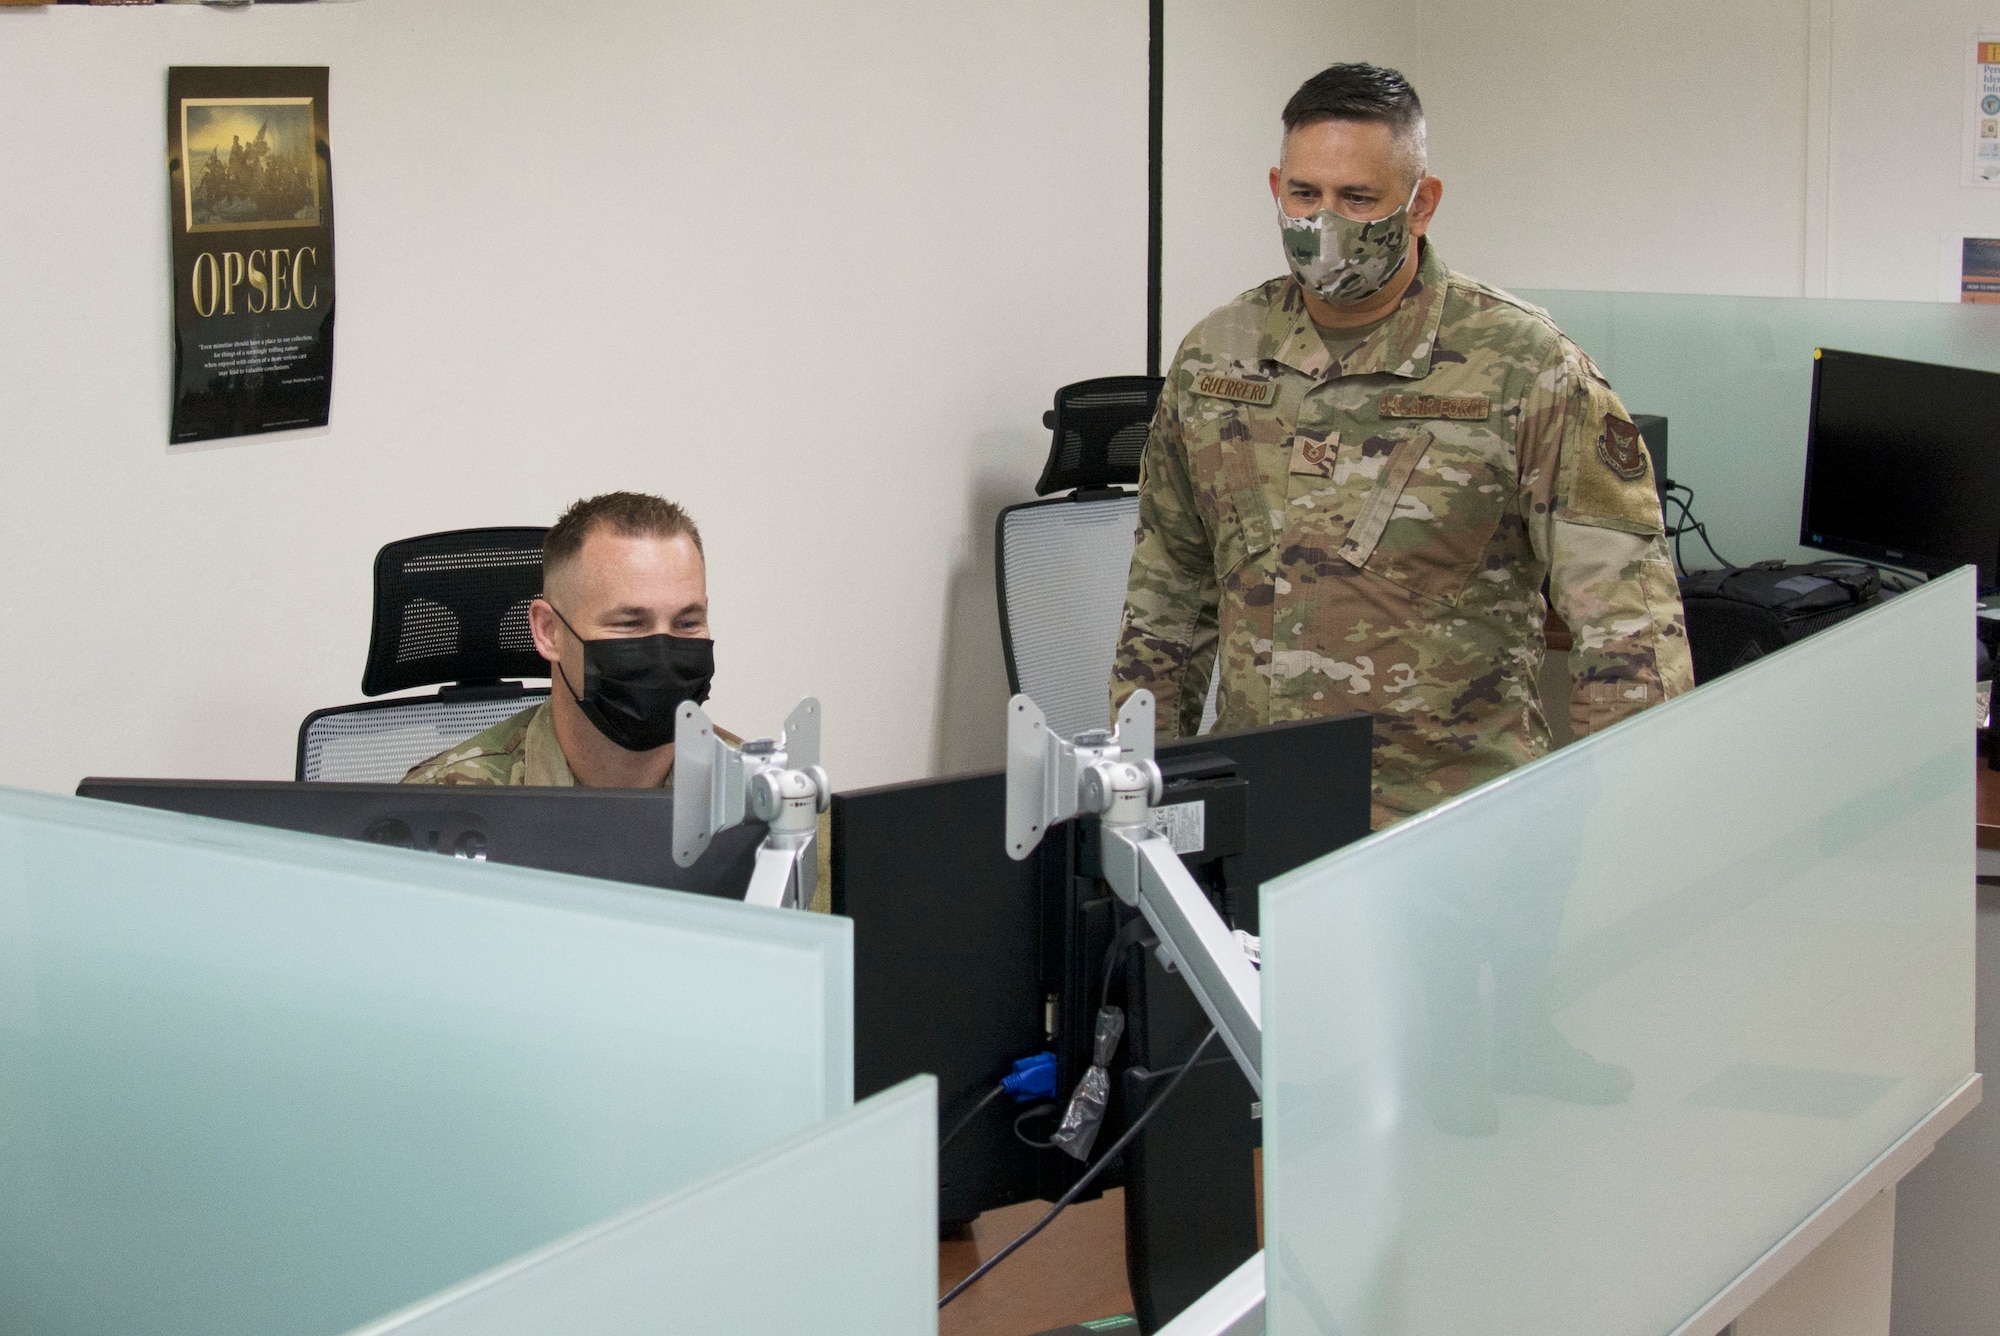 A photo of U.S. Air Force Master Sgt. David Popp, left, and Tech. Sgt. Kerry Guerrero of the 44th Aerial Port Squadron utilize the recently built cybercafe at Andersen Air Force Base, Guam, July 28, 2020. The cybercafe was created to increase internet accessibility by optimizing workspace utilization through the use of squadron innovation funds from AFWERX, the Air Force’s innovation program. (U.S. Air Force photo by Tech. Sgt. Tricia C. Topasna)